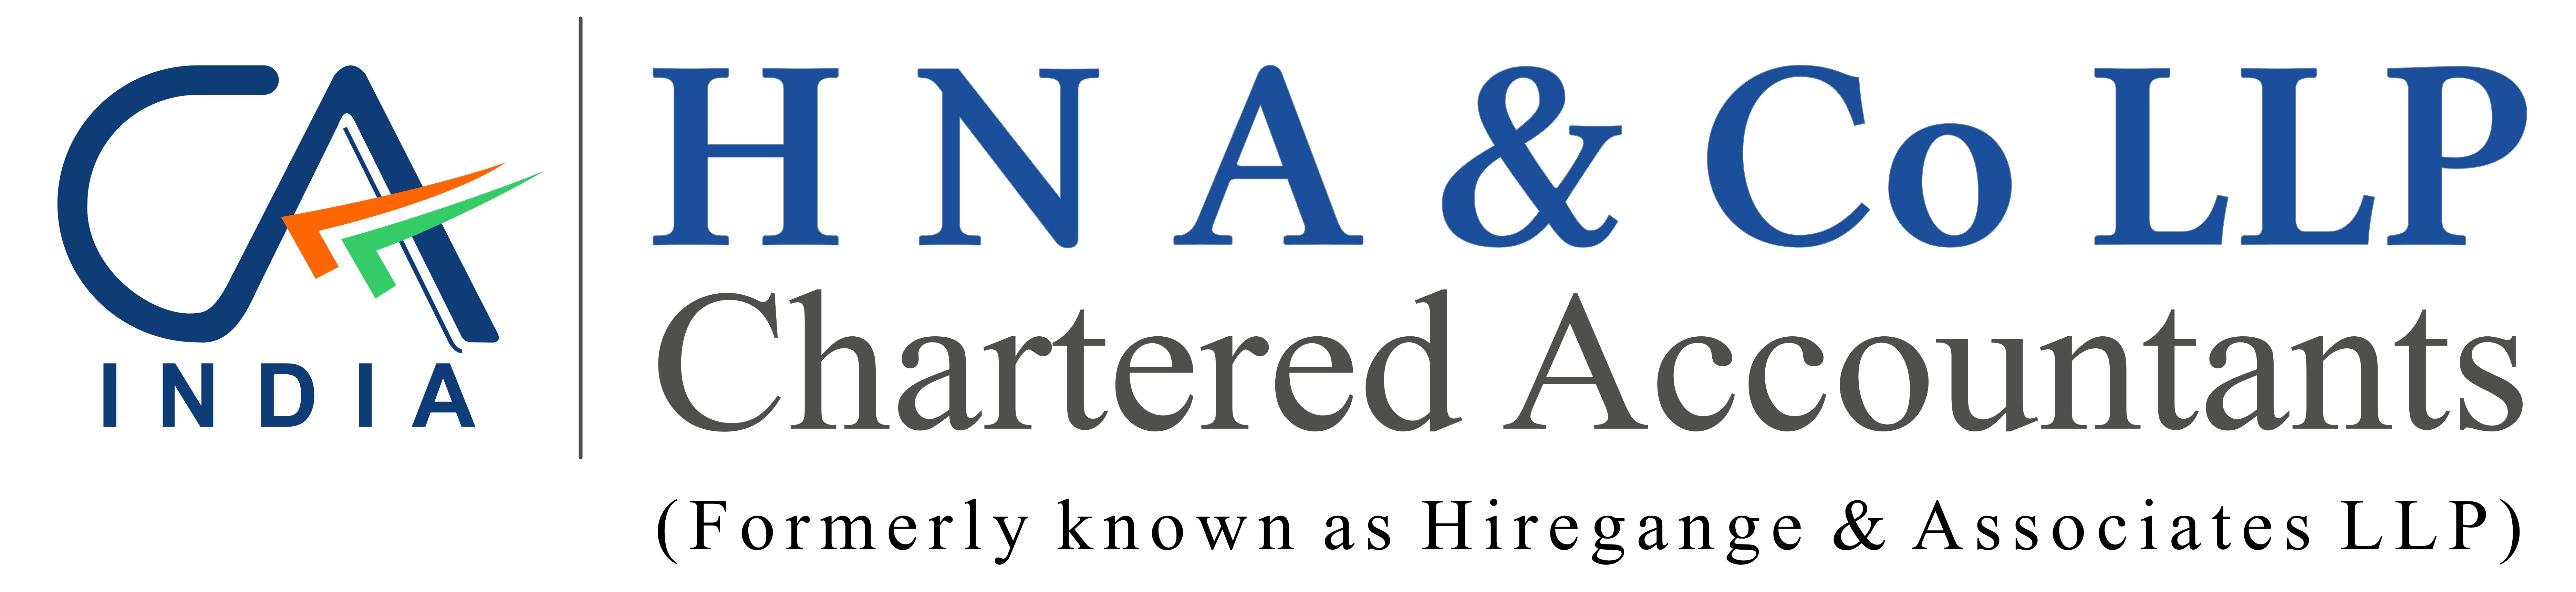 H N A & Co LLP (formerly known as Hiregange & Associates LLP)